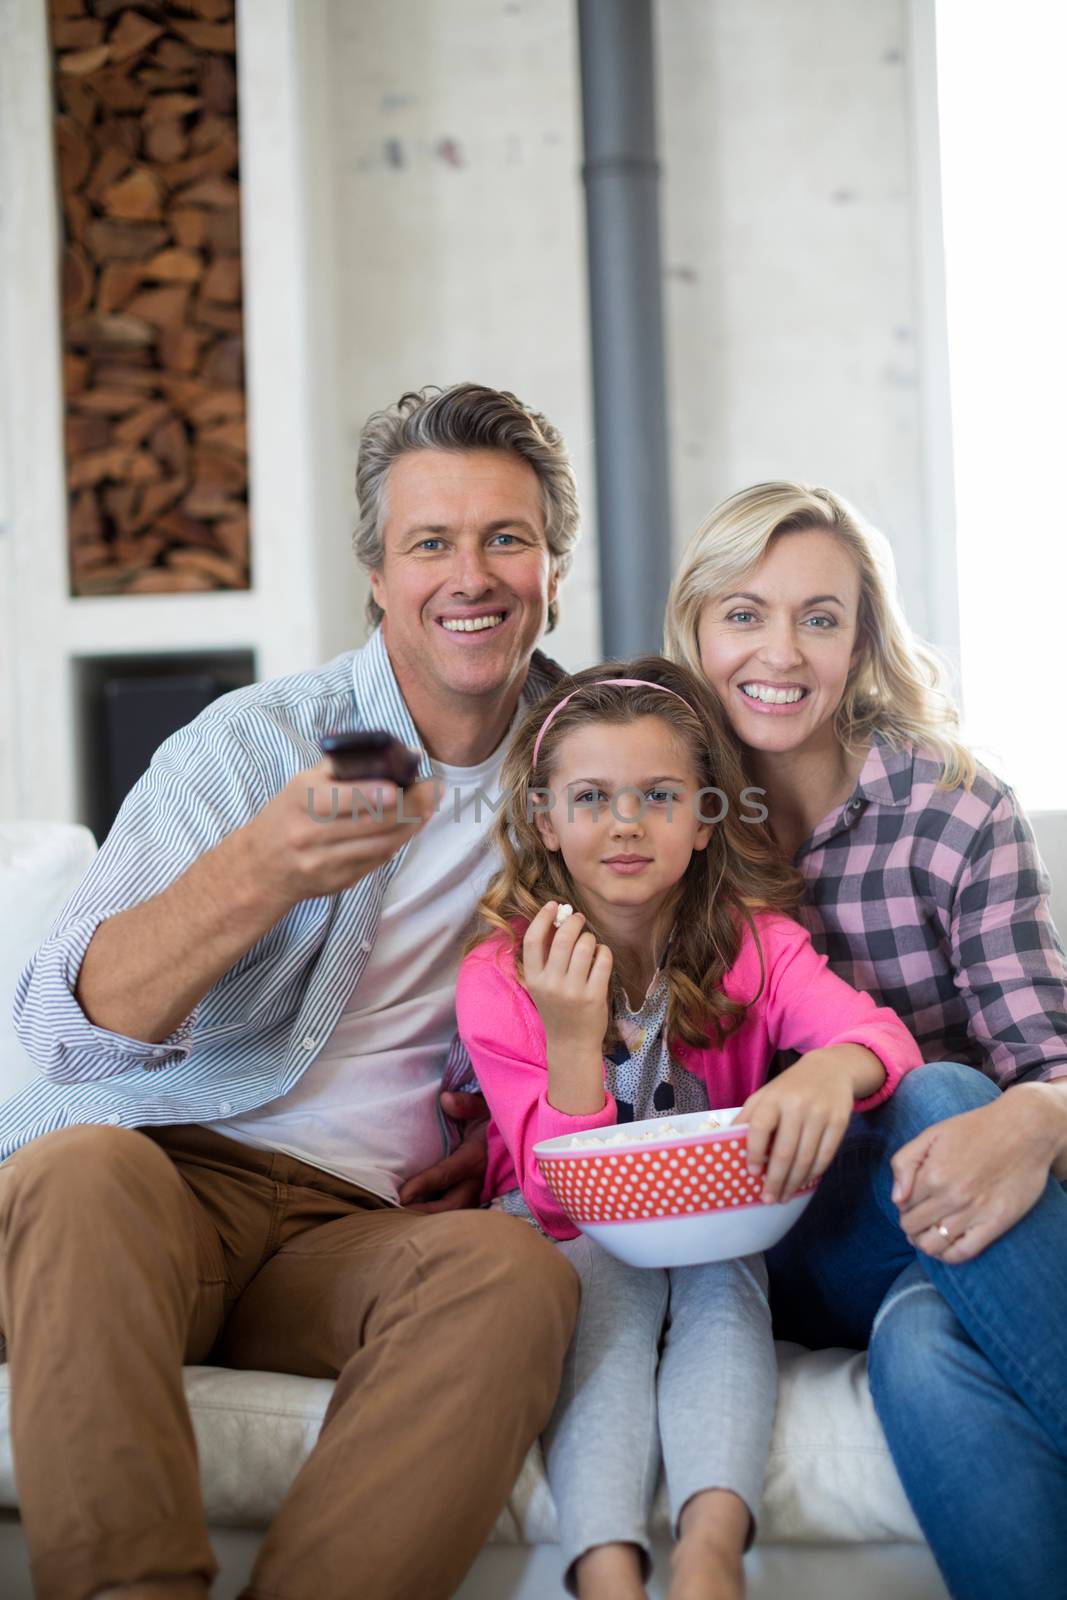 Smiling family watching television while having popcorn in living room at home